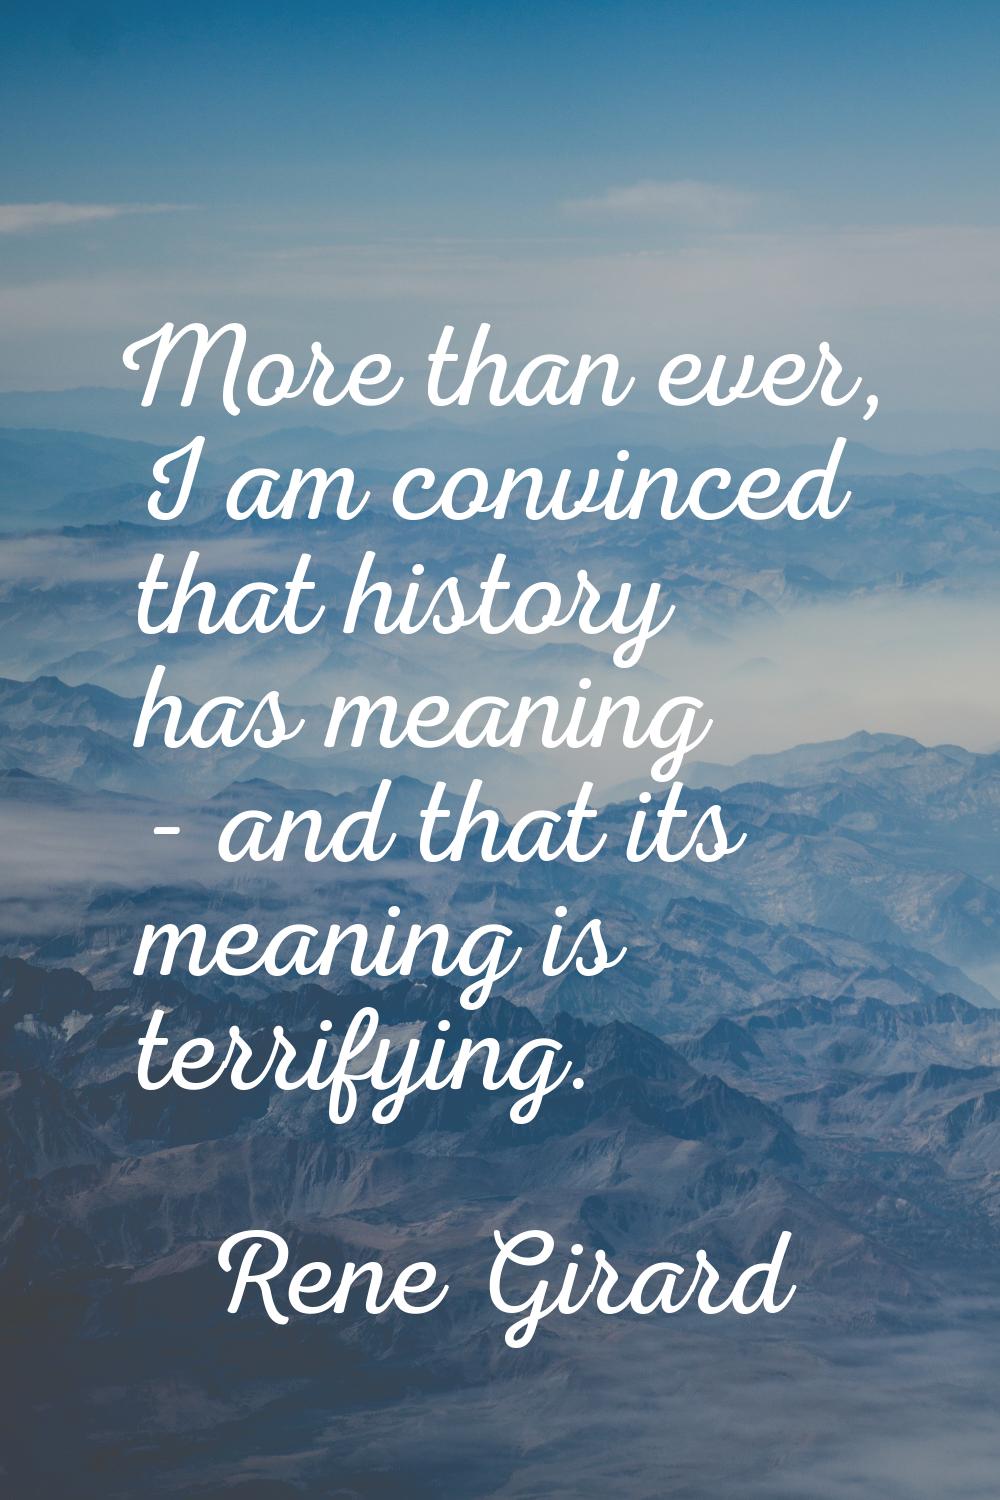 More than ever, I am convinced that history has meaning - and that its meaning is terrifying.